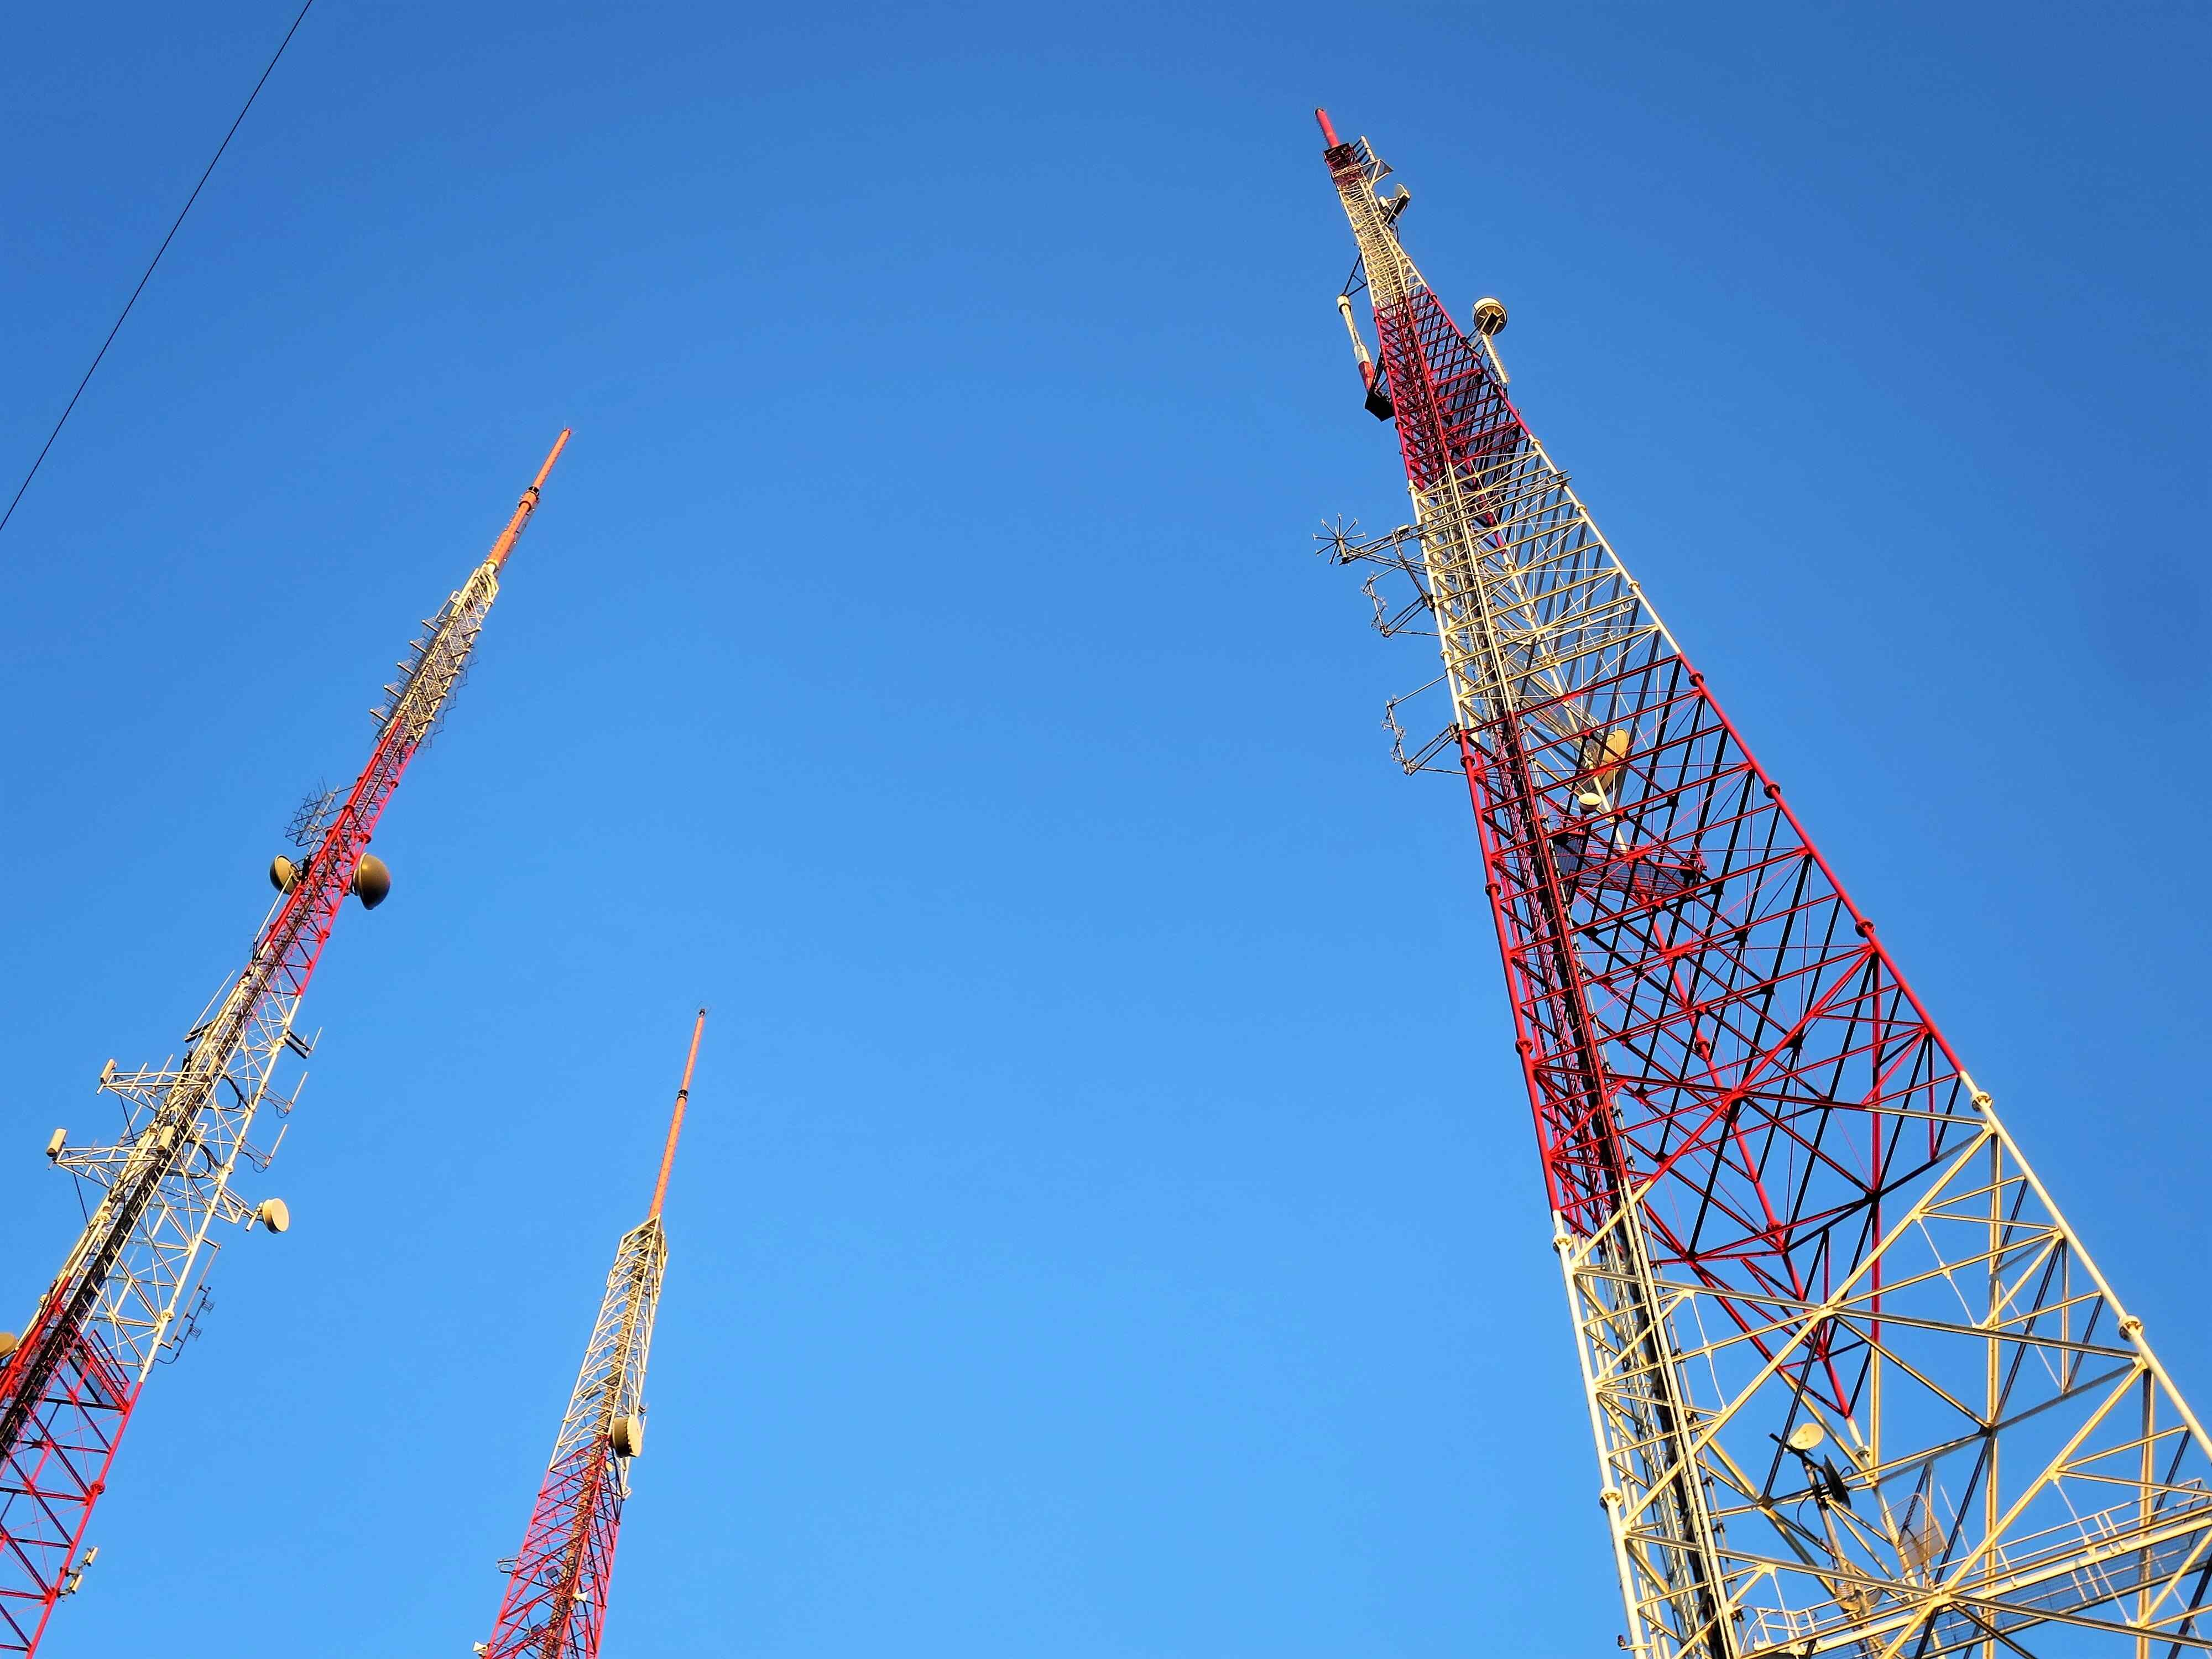 An image of phone towers.